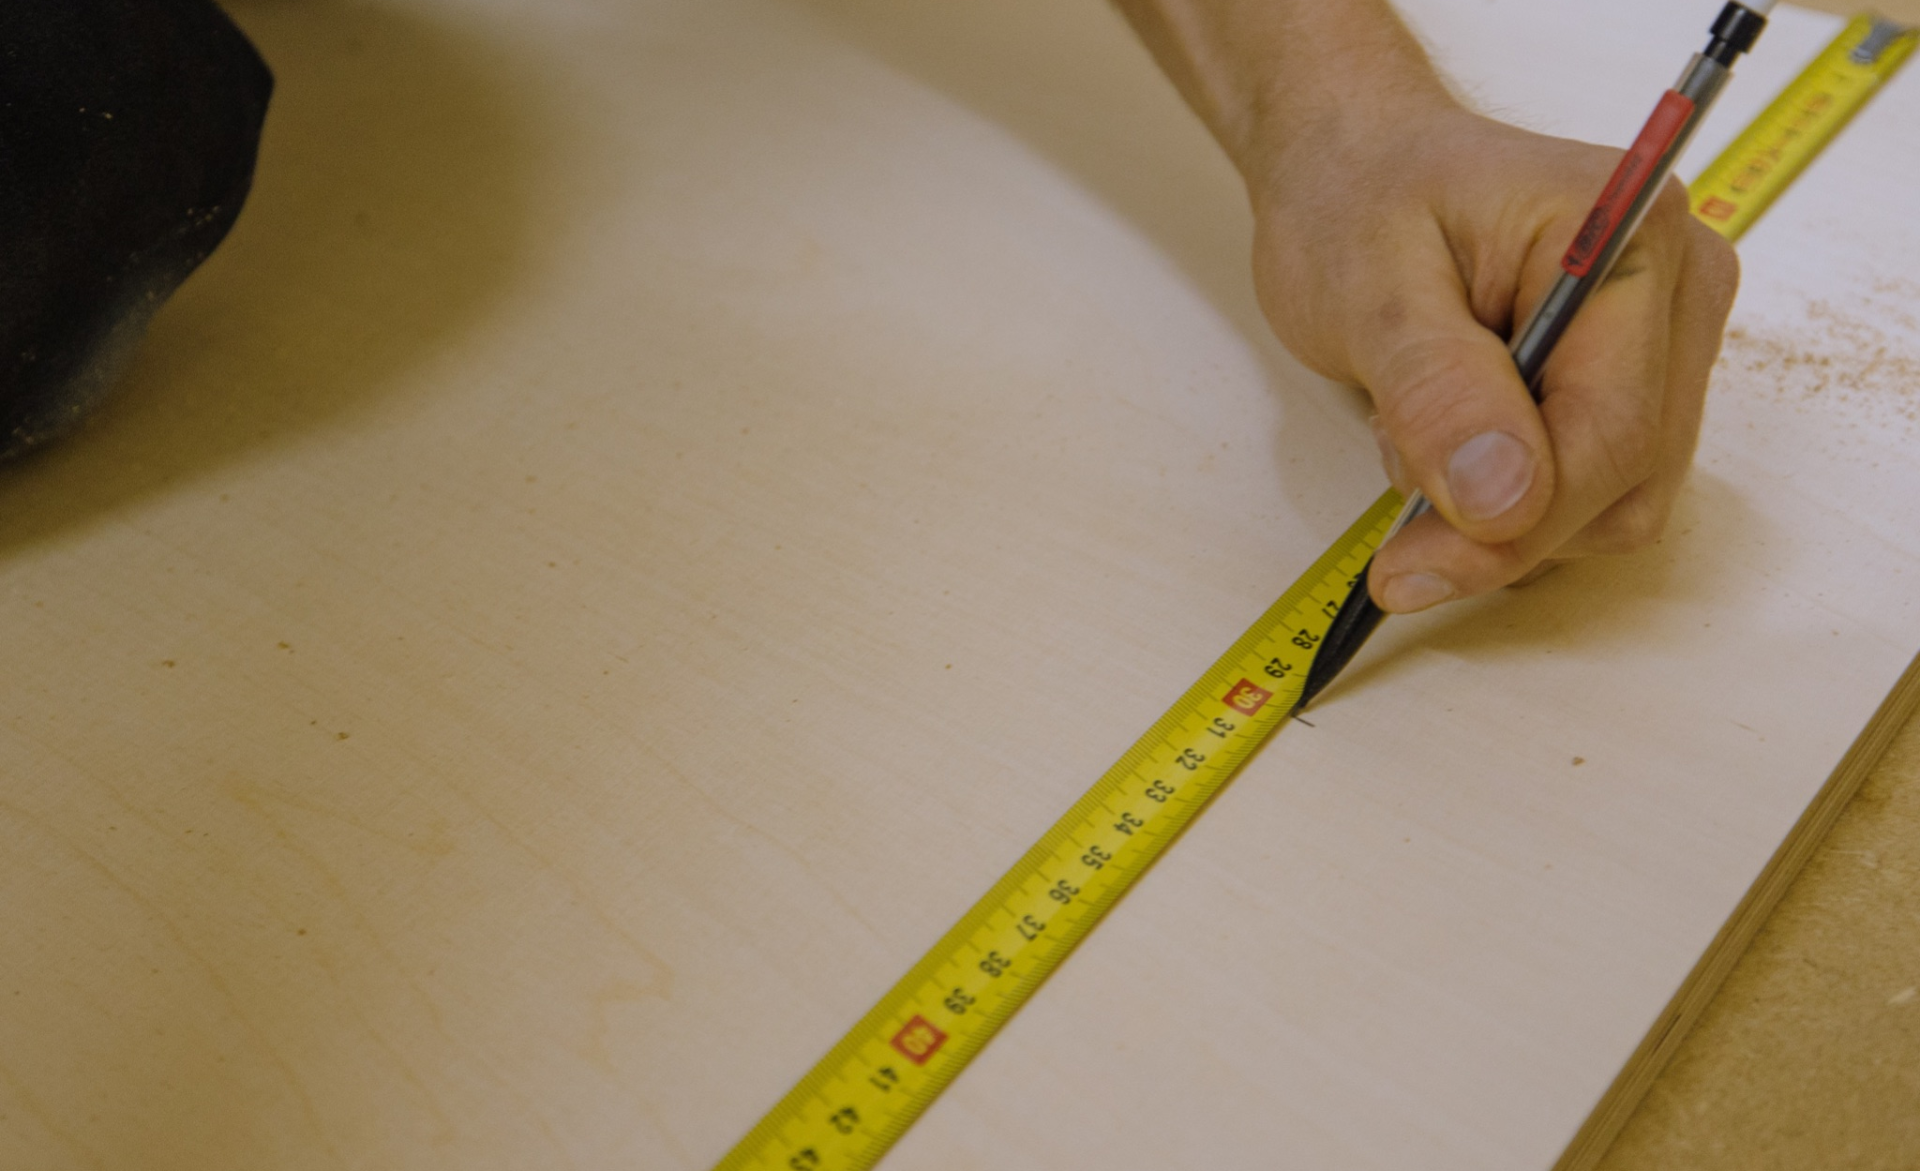 Measuring tape and pen